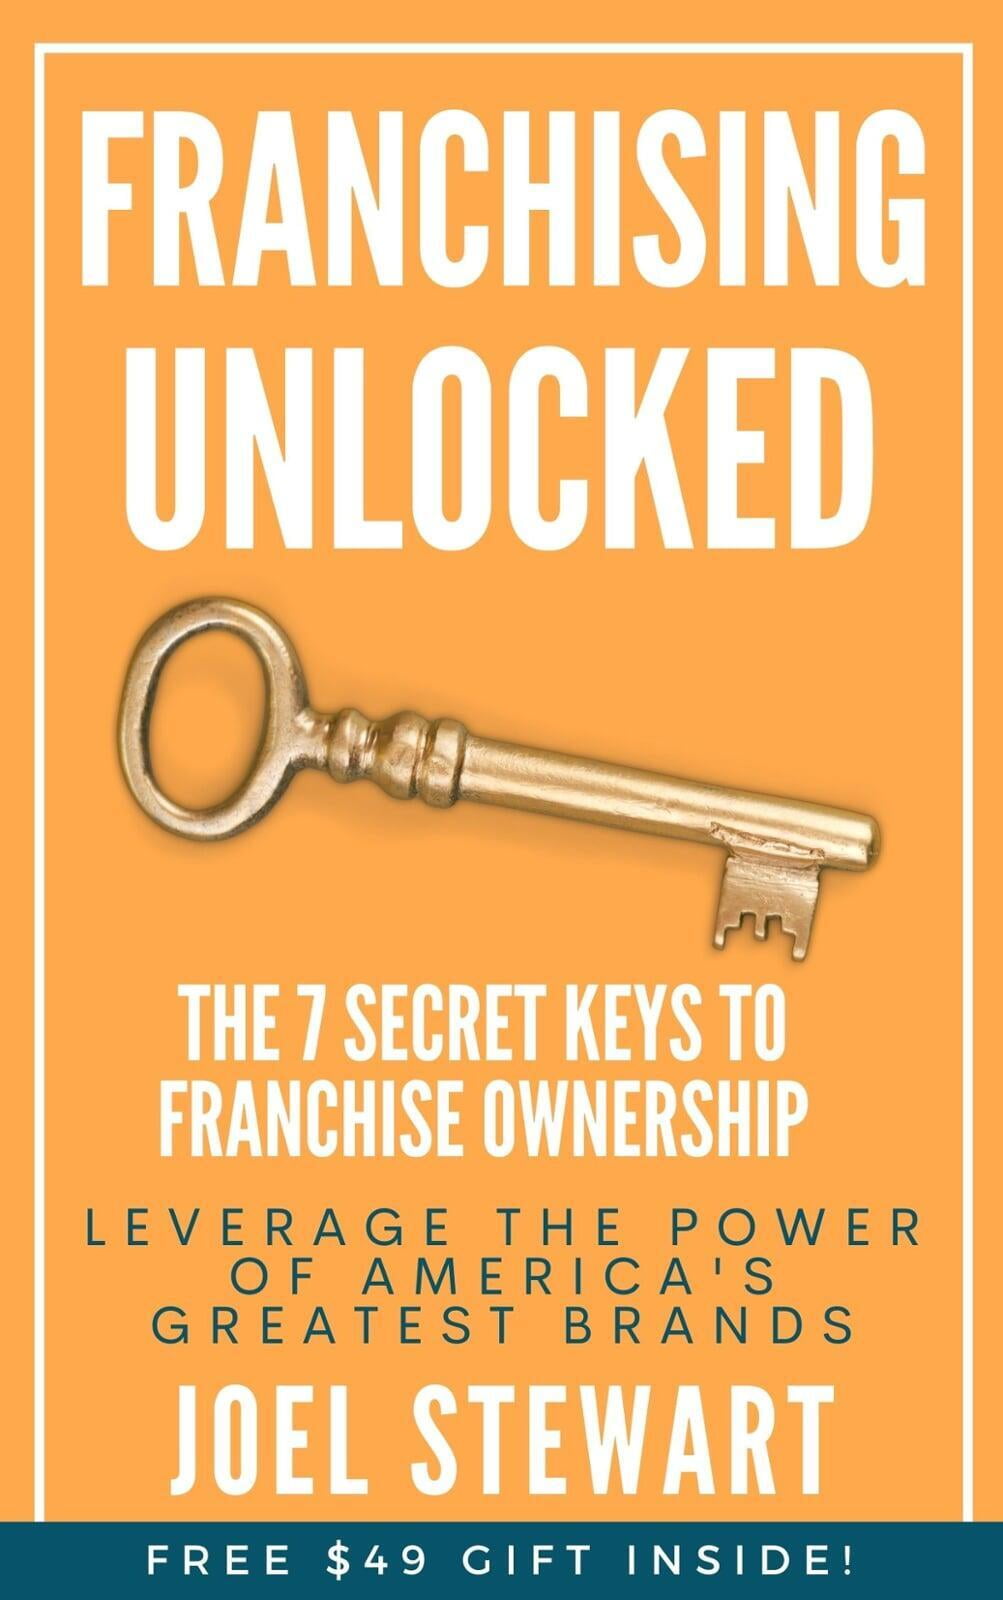 Image of the e-book Franchising Unlocked. Links to product listing on Amazon